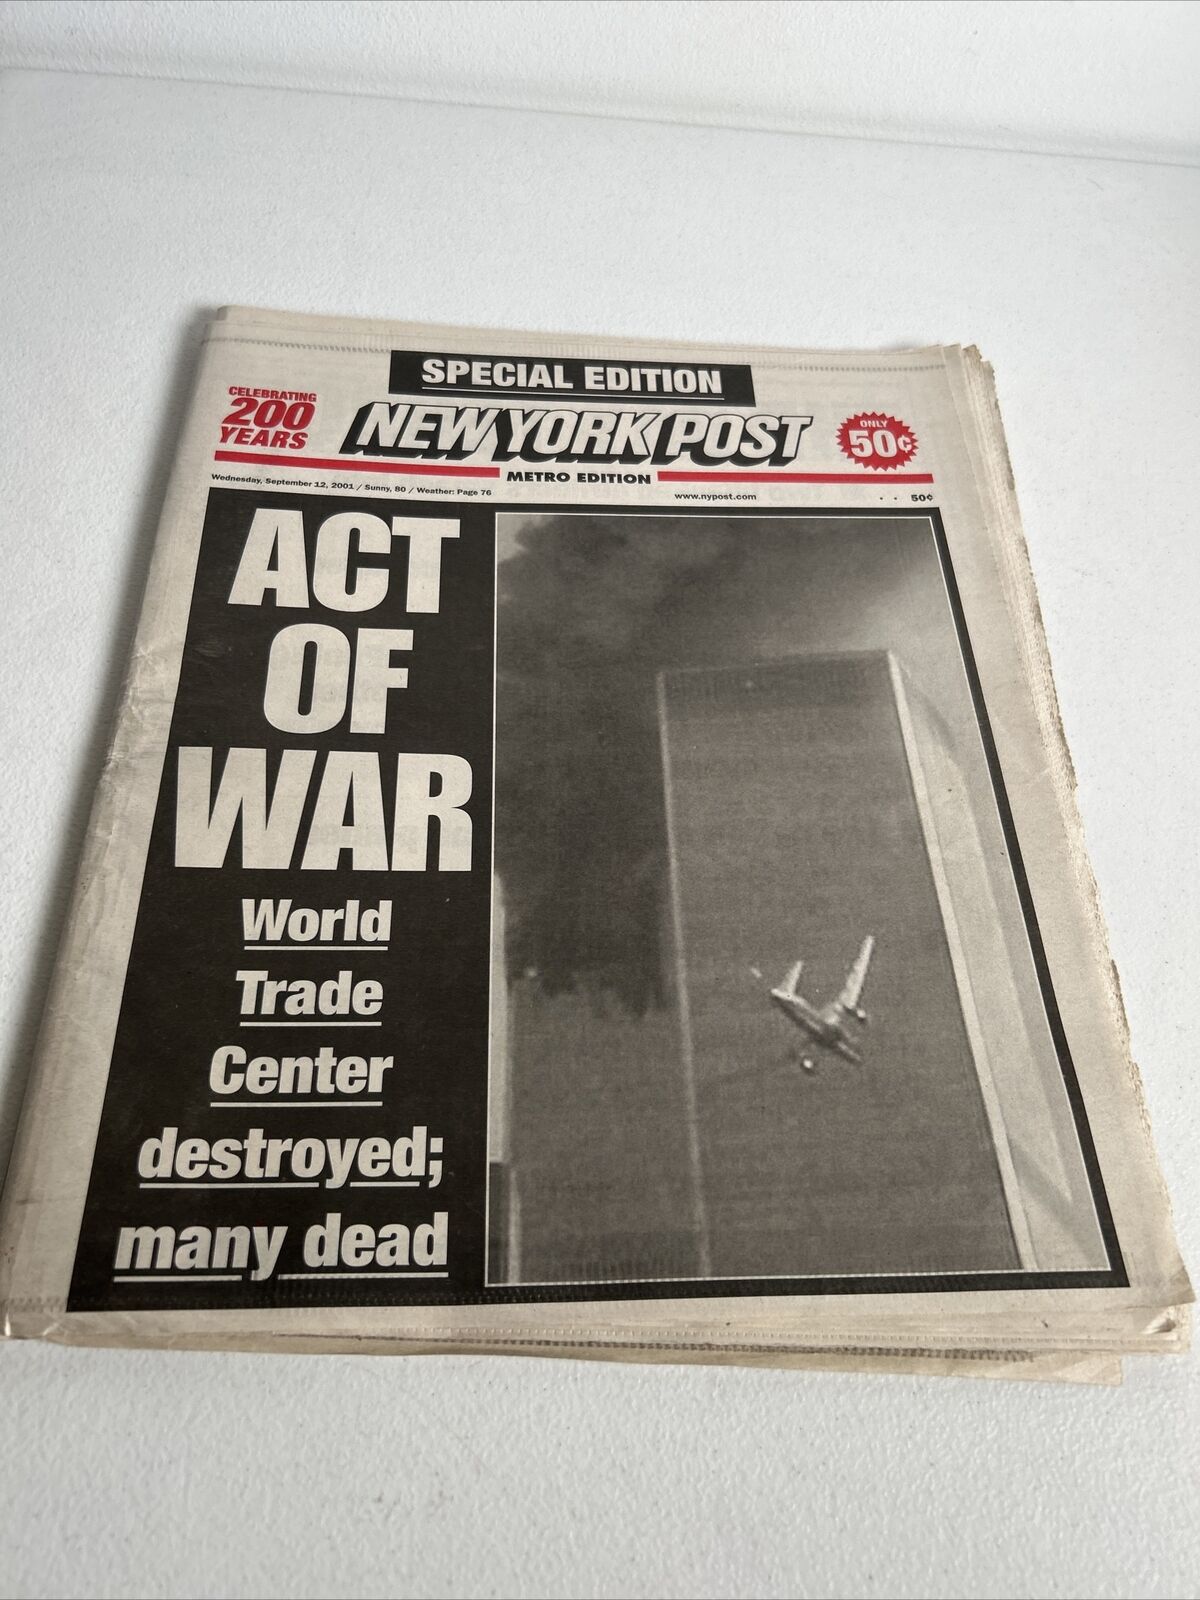 NEW YORK POST SEPT 12 2001 ACT OF WAR SPECIAL EDITION 9-11 WORLD TRADE CENTER